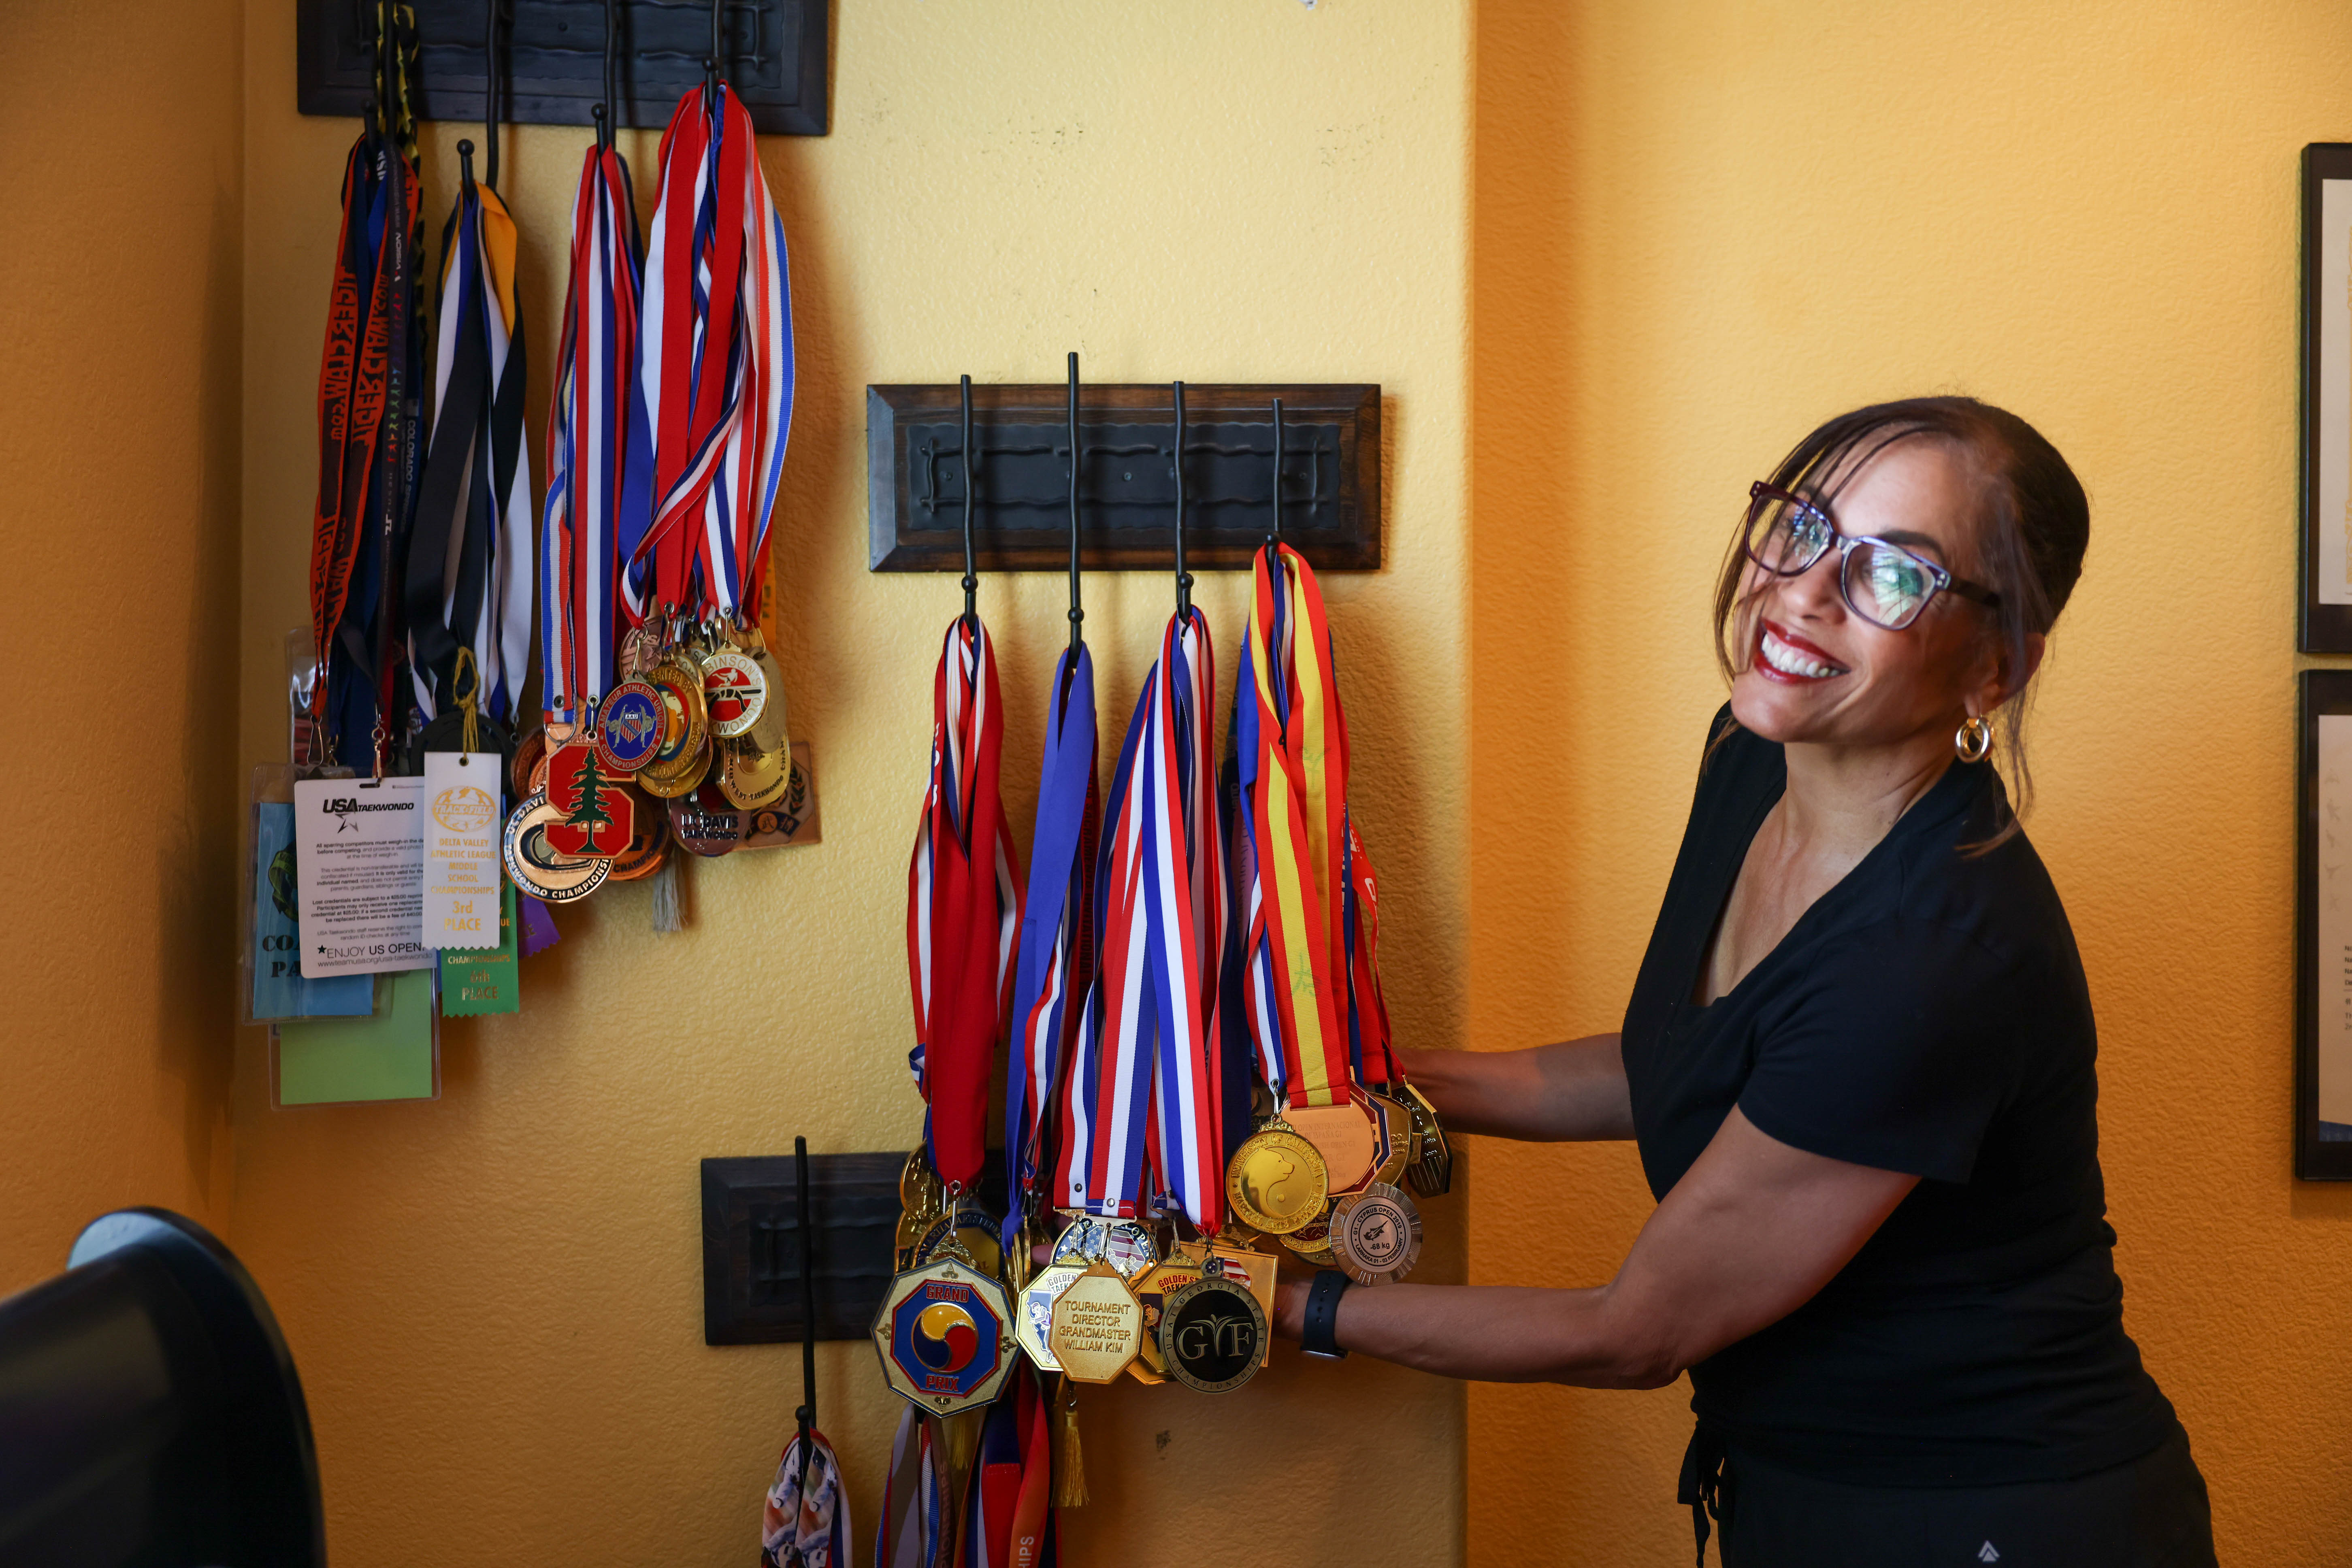 Denise Nickolas, mother of Olympian CJ Nickolas, shows dozens of medals her son has won in national and international Tae-Kwan-Do competitions displayed in his room in Brentwood, Calif., on Wednesday, July 3, 2024. Denise and her son got into the sport when he was 3. Both have competed in tournaments and just a few years ago, Denise won a national title as her son is already with the USA Olympic team heading to Paris. (Ray Chavez/Bay Area News Group)